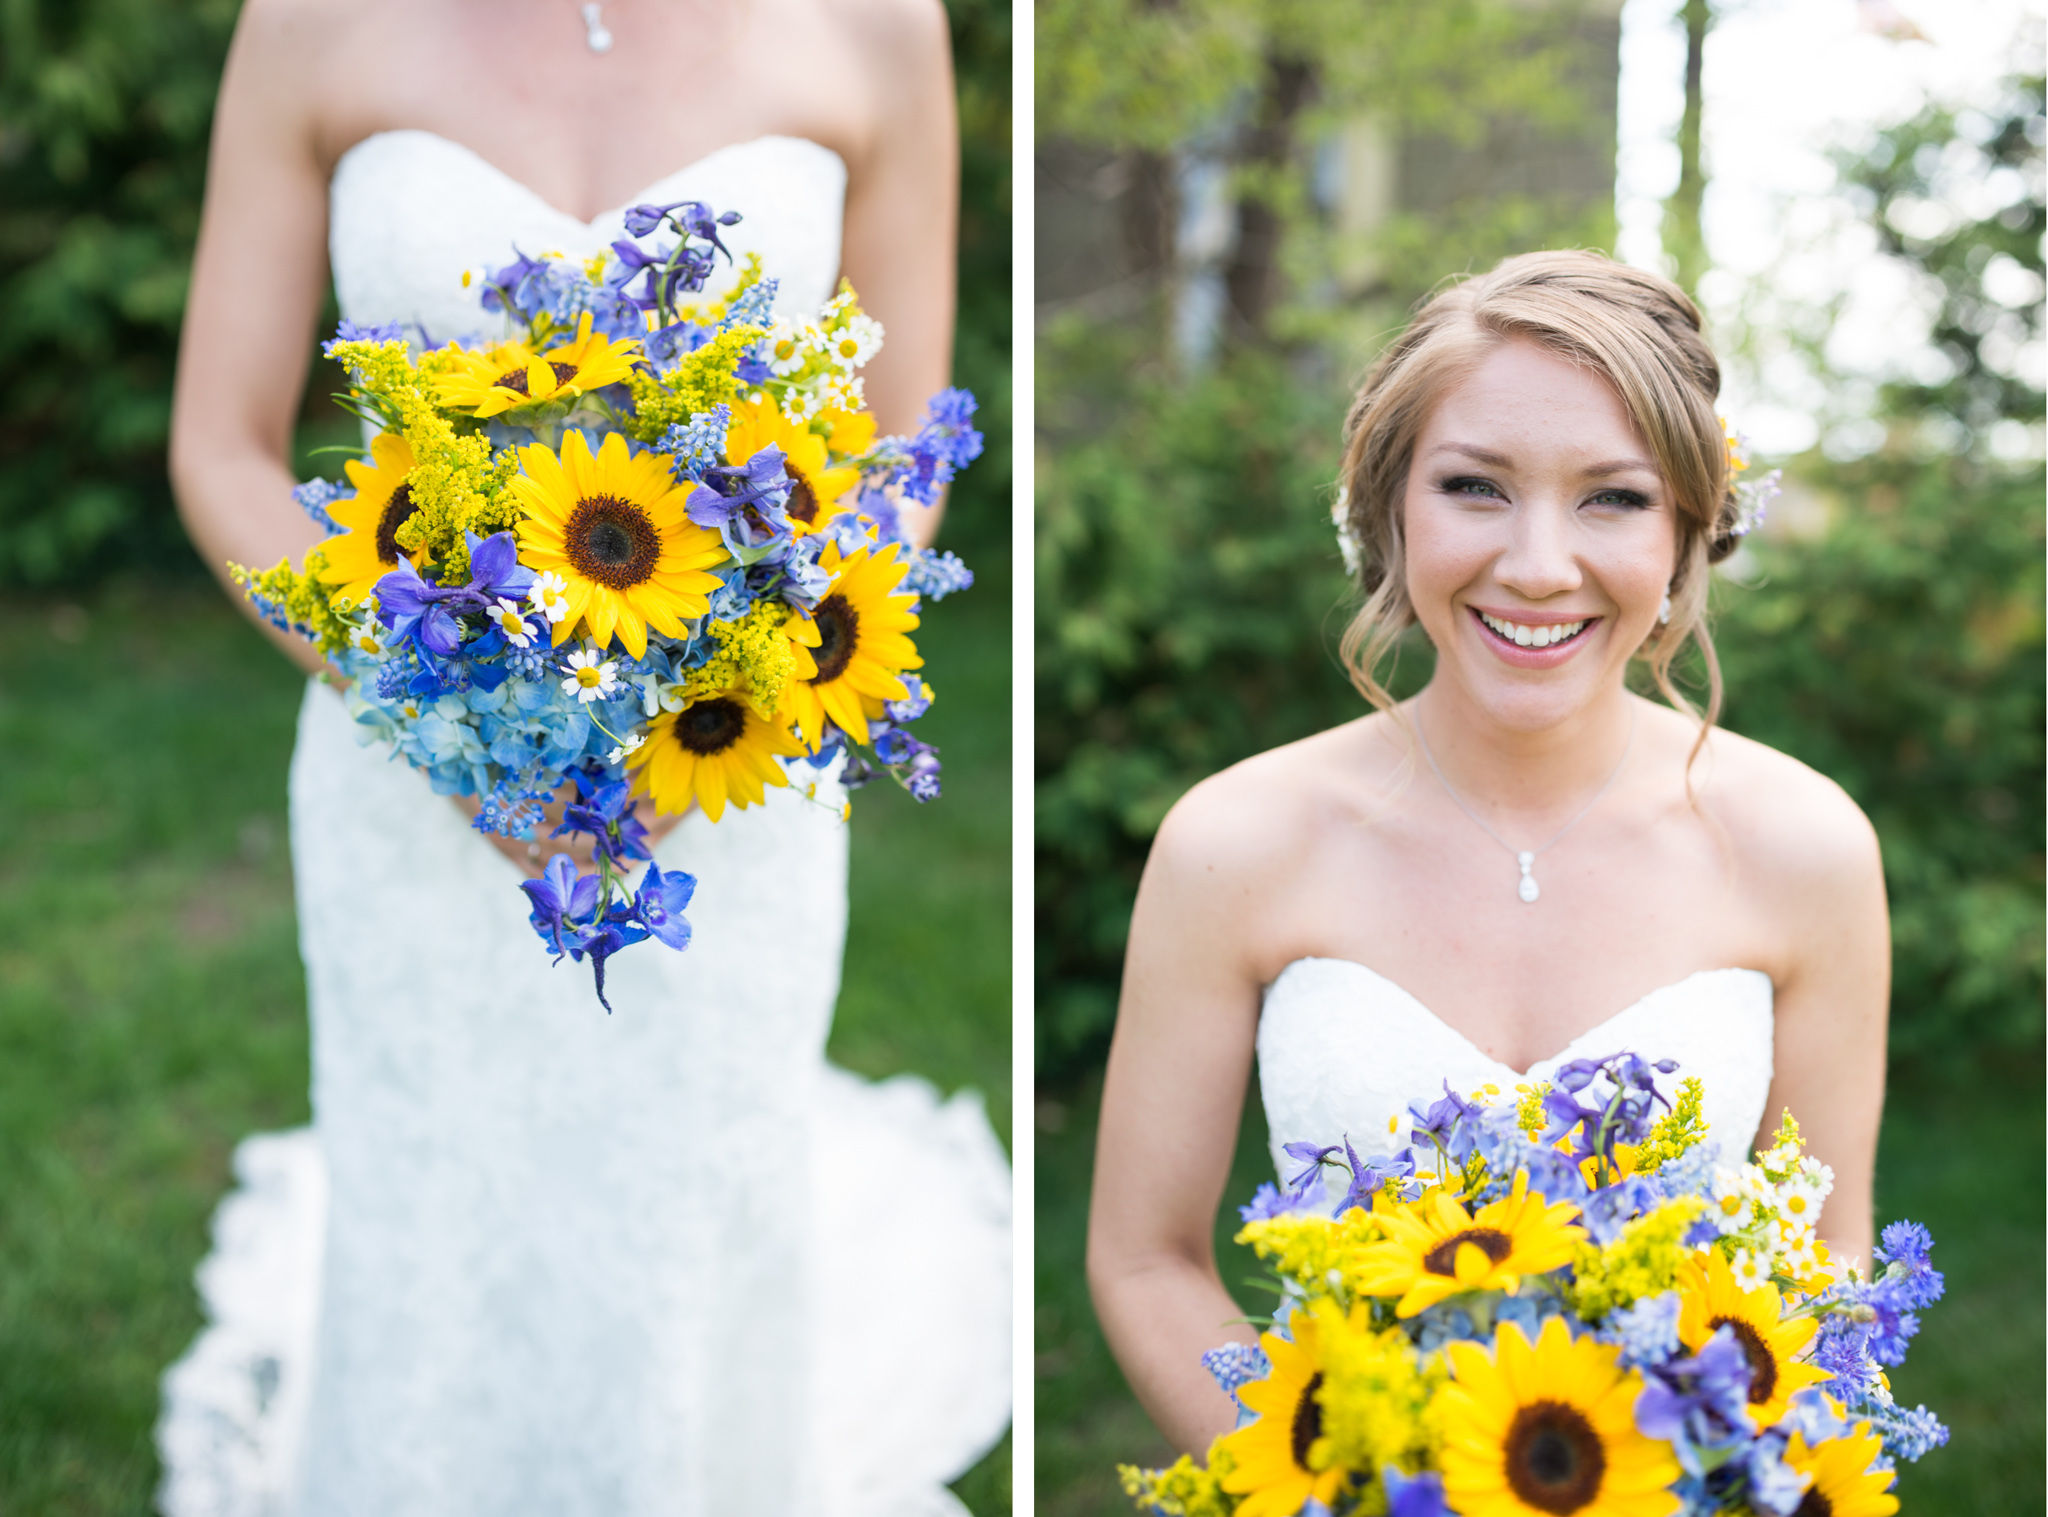 32-Mike+Alyssa - Sunflower Bridal Bouquet Cape May Southern Mansion Wedding photo